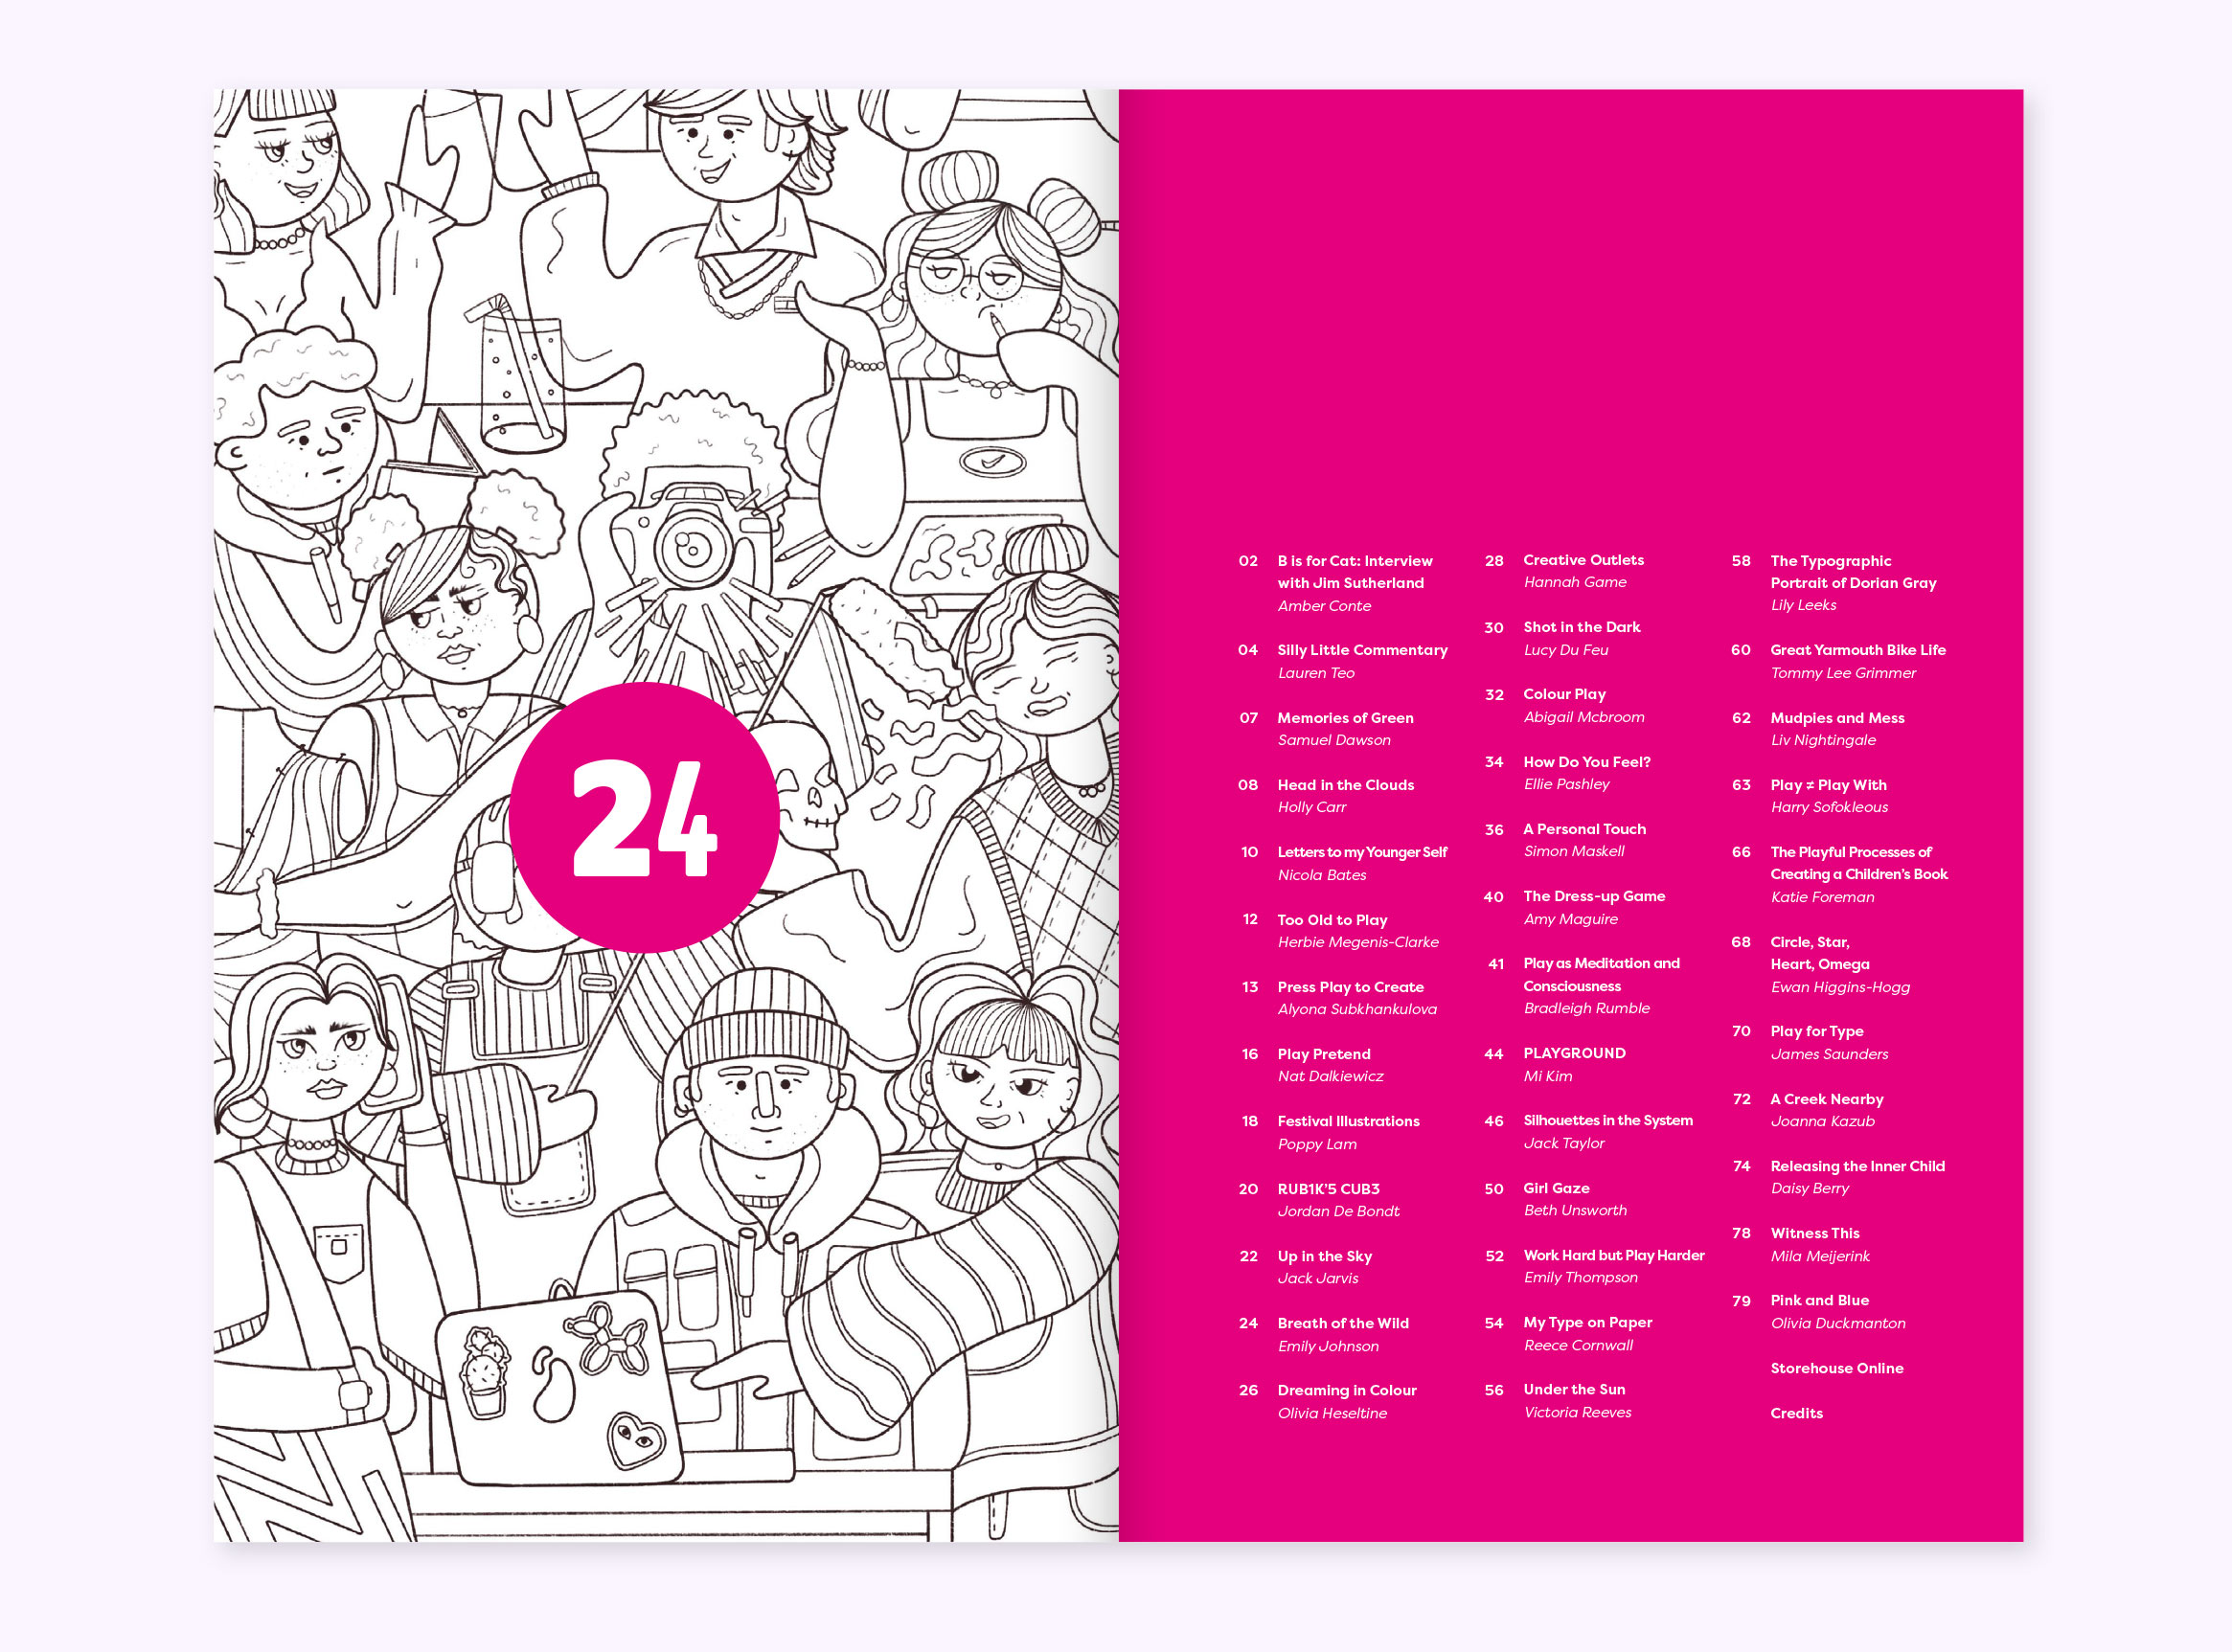 Contents page design featuring black and white illustration and vibrant pink page that lists contents.